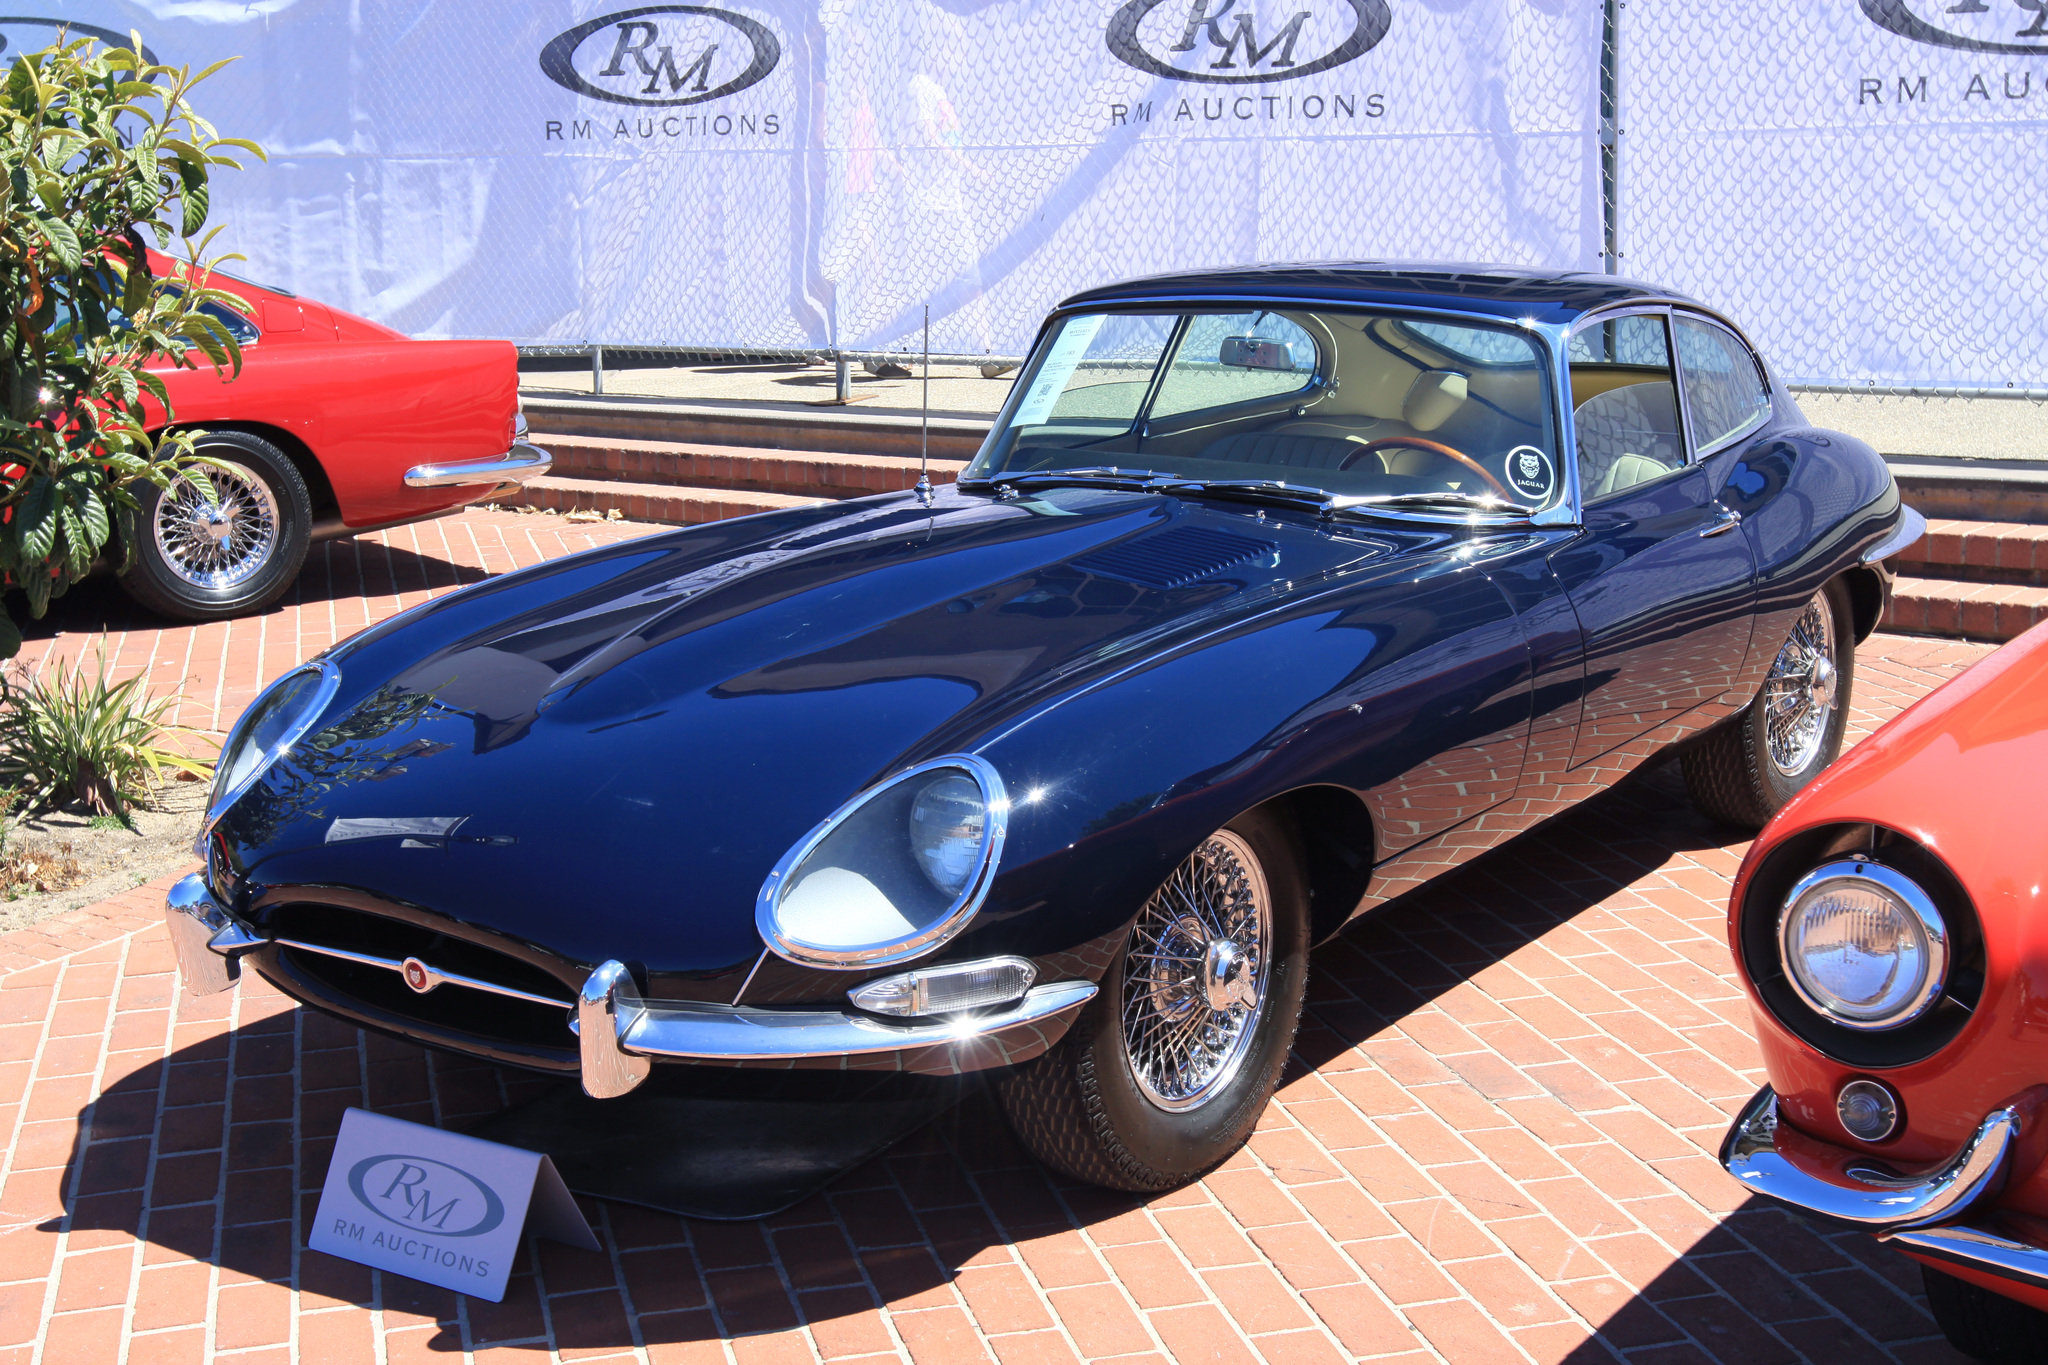 1965 Jaguar E-Type 4.2-Litre Fixed Head Coupe 1E30680 - sold for $159,500 at RM Auctions. Offered from the collection of Elton Stephens Jr. Featuring a recent mechanical and cosmetic freshening by marque specialist. Accompanied by its Jaguar Daimler Heritage Trust Certificate.